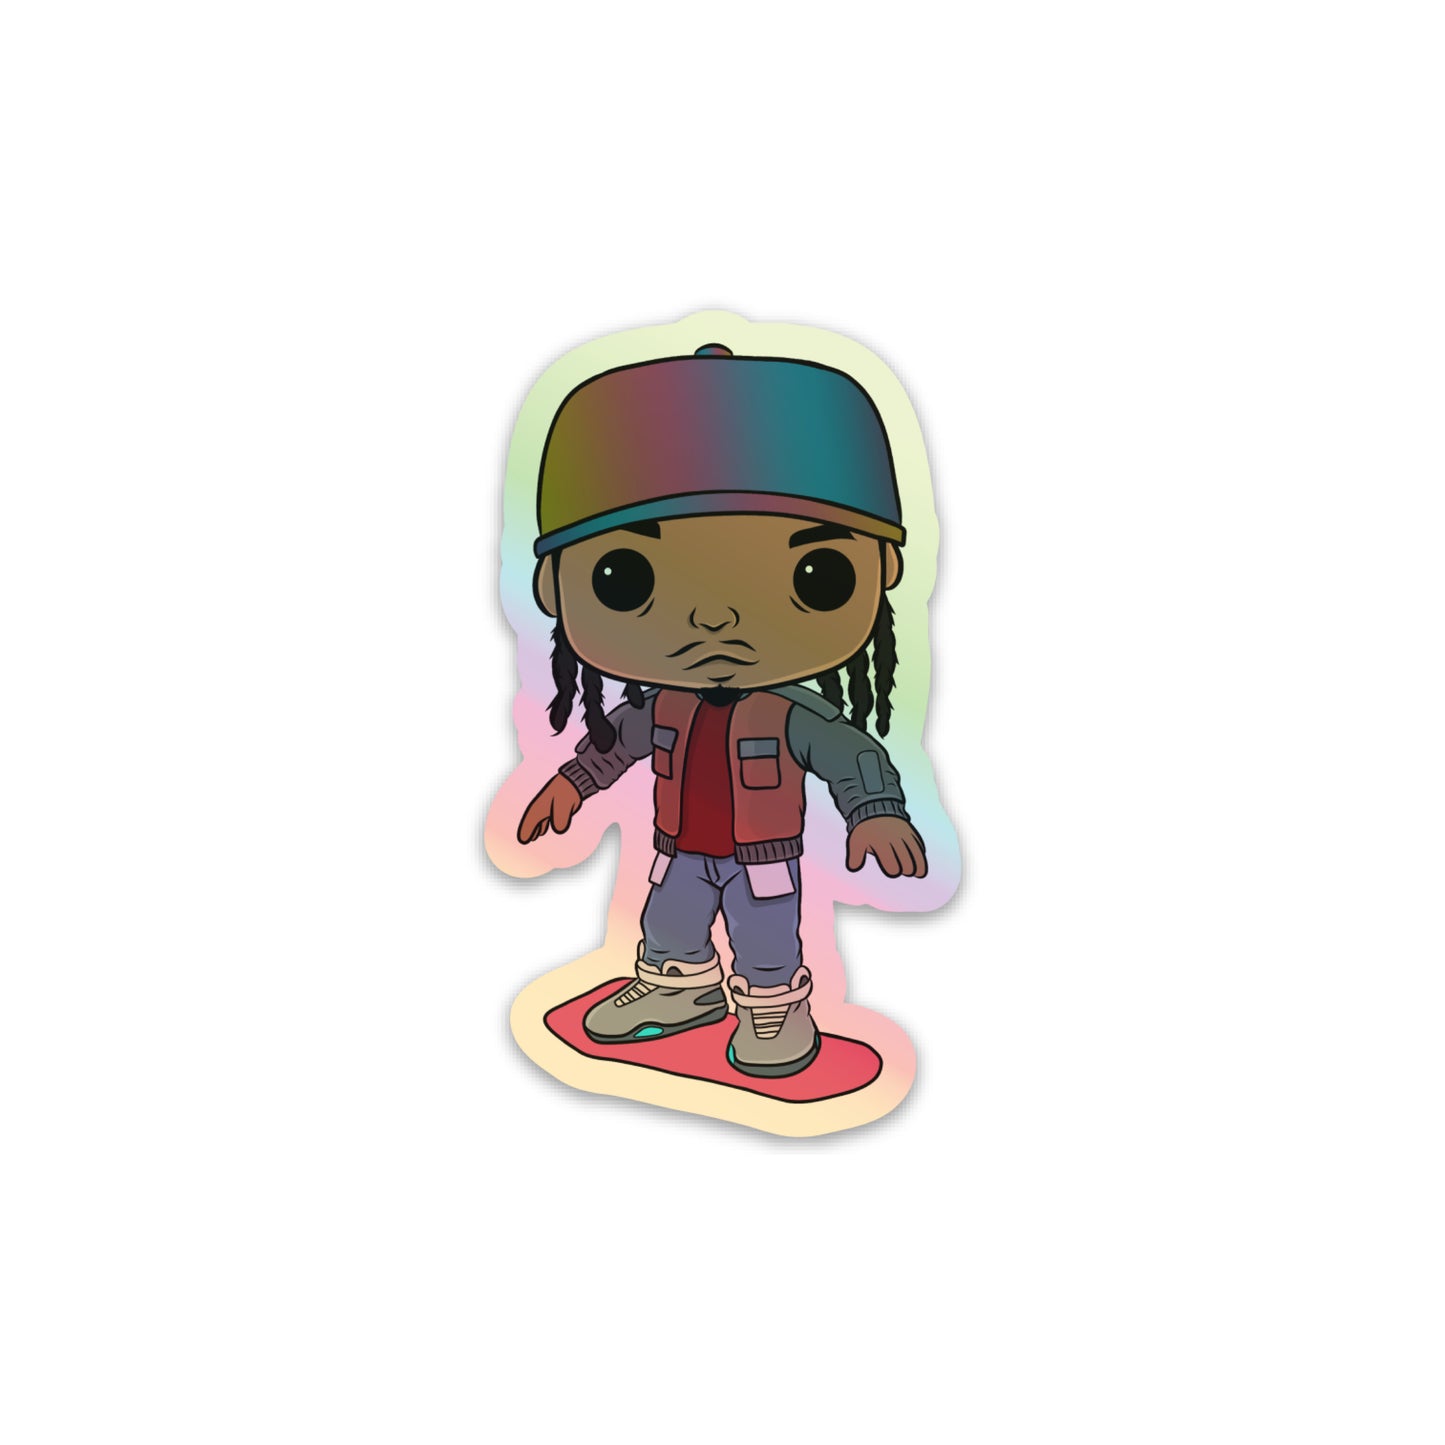 CarSs Hover Holographic Sticker